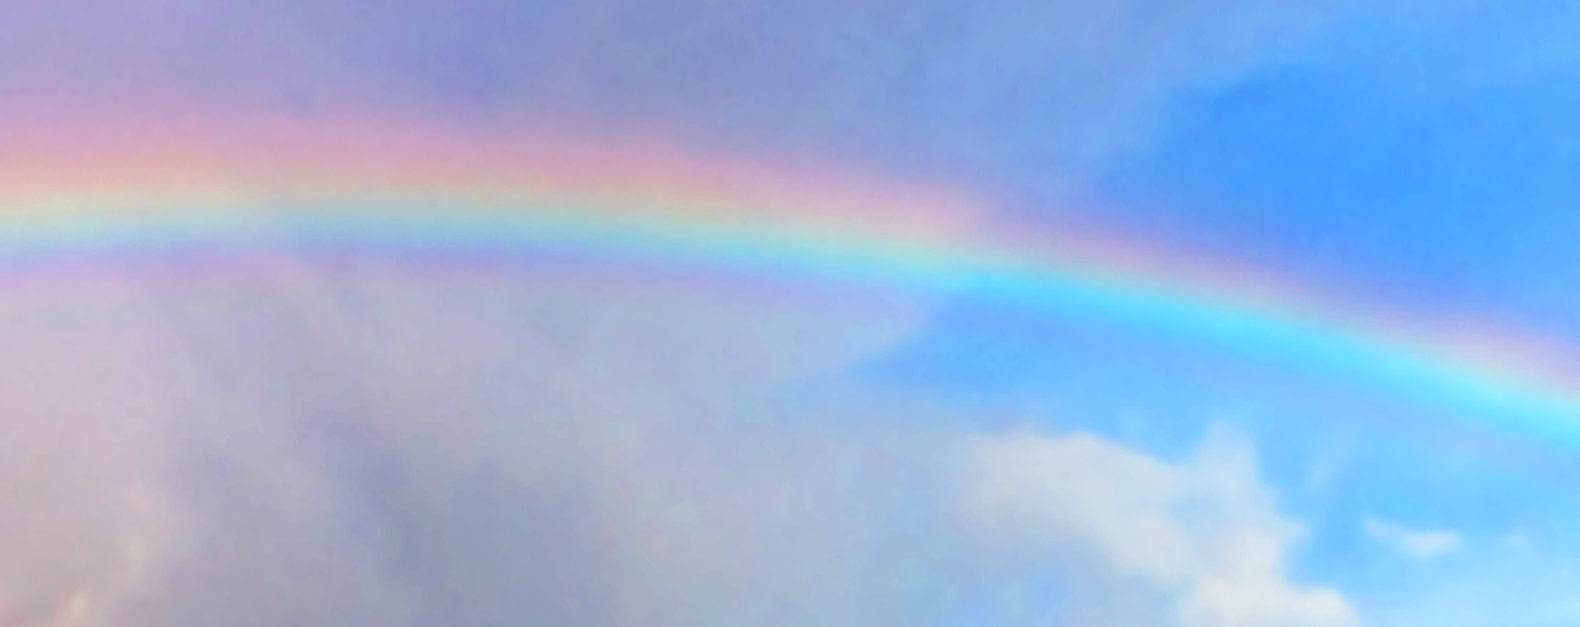 WAM Bright Half Life feature image, rainbow against partially cloudy sky